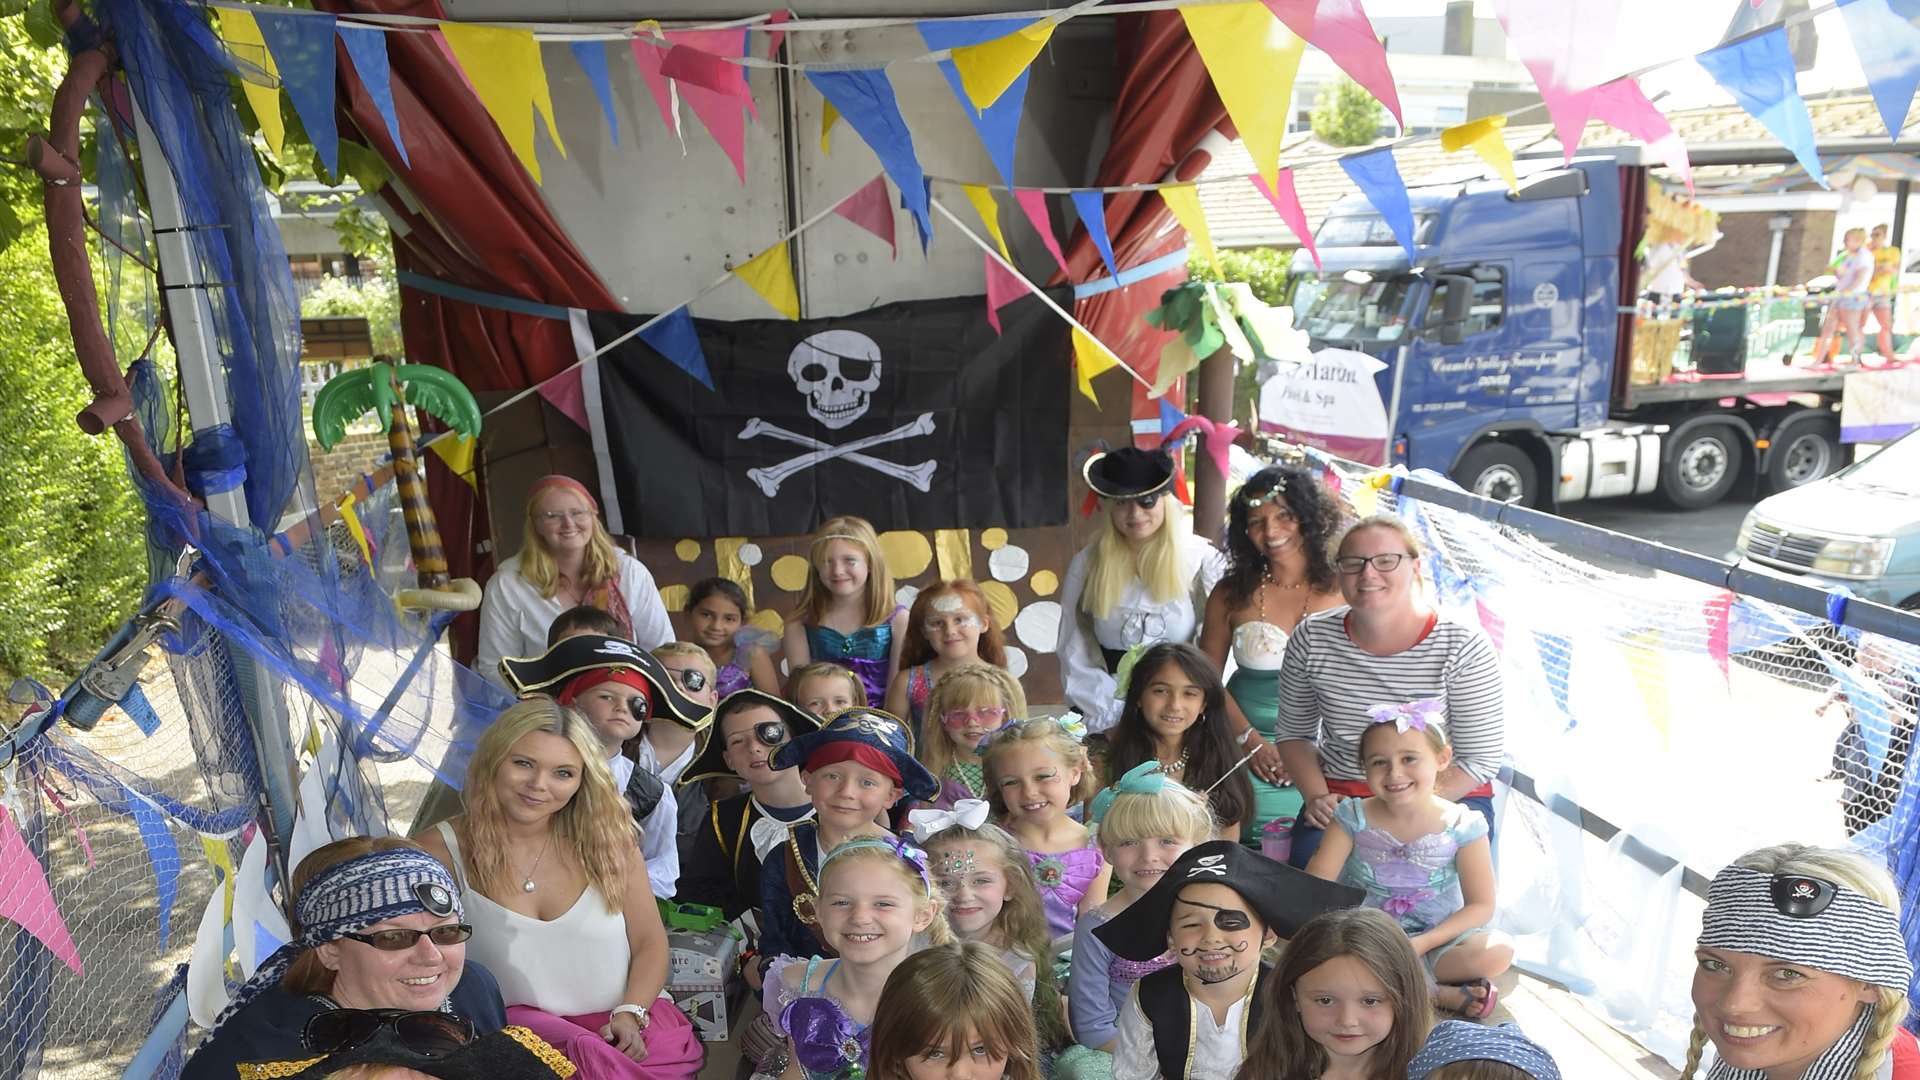 The pirate-themed float for St Martin's Primary School at the Dover carnival.